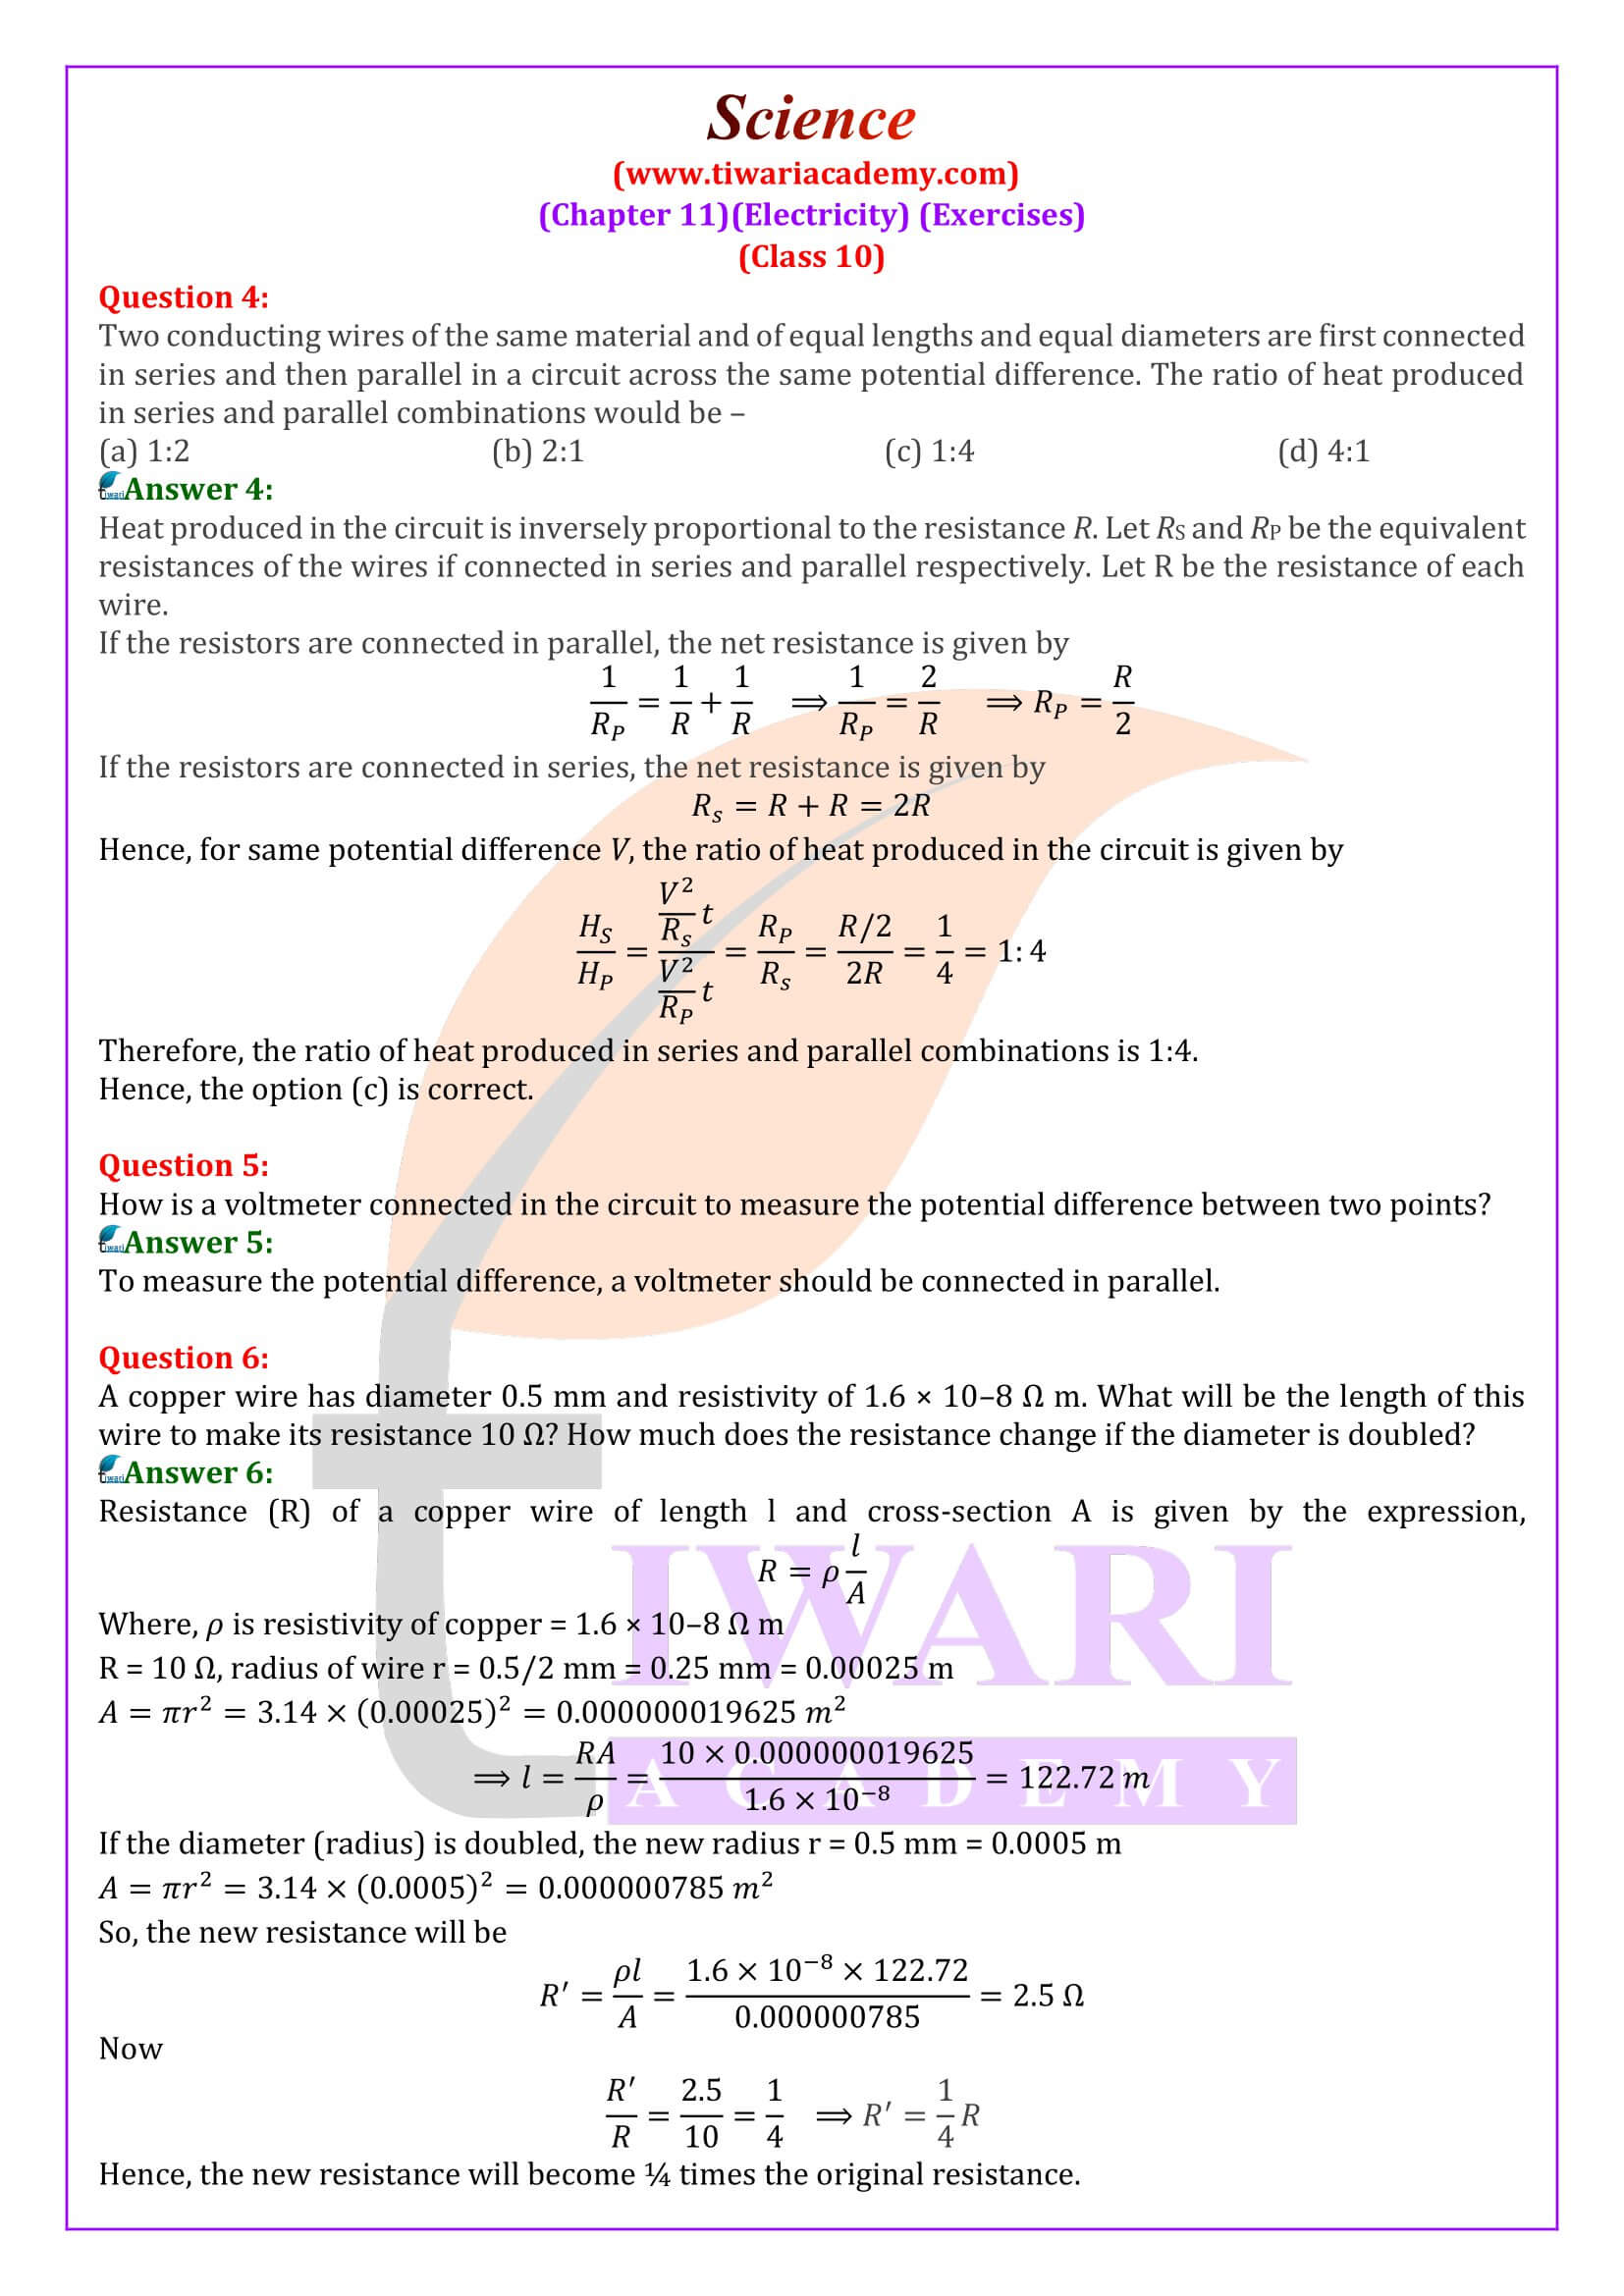 NCERT Solutions for Class 10 Science Chapter 11